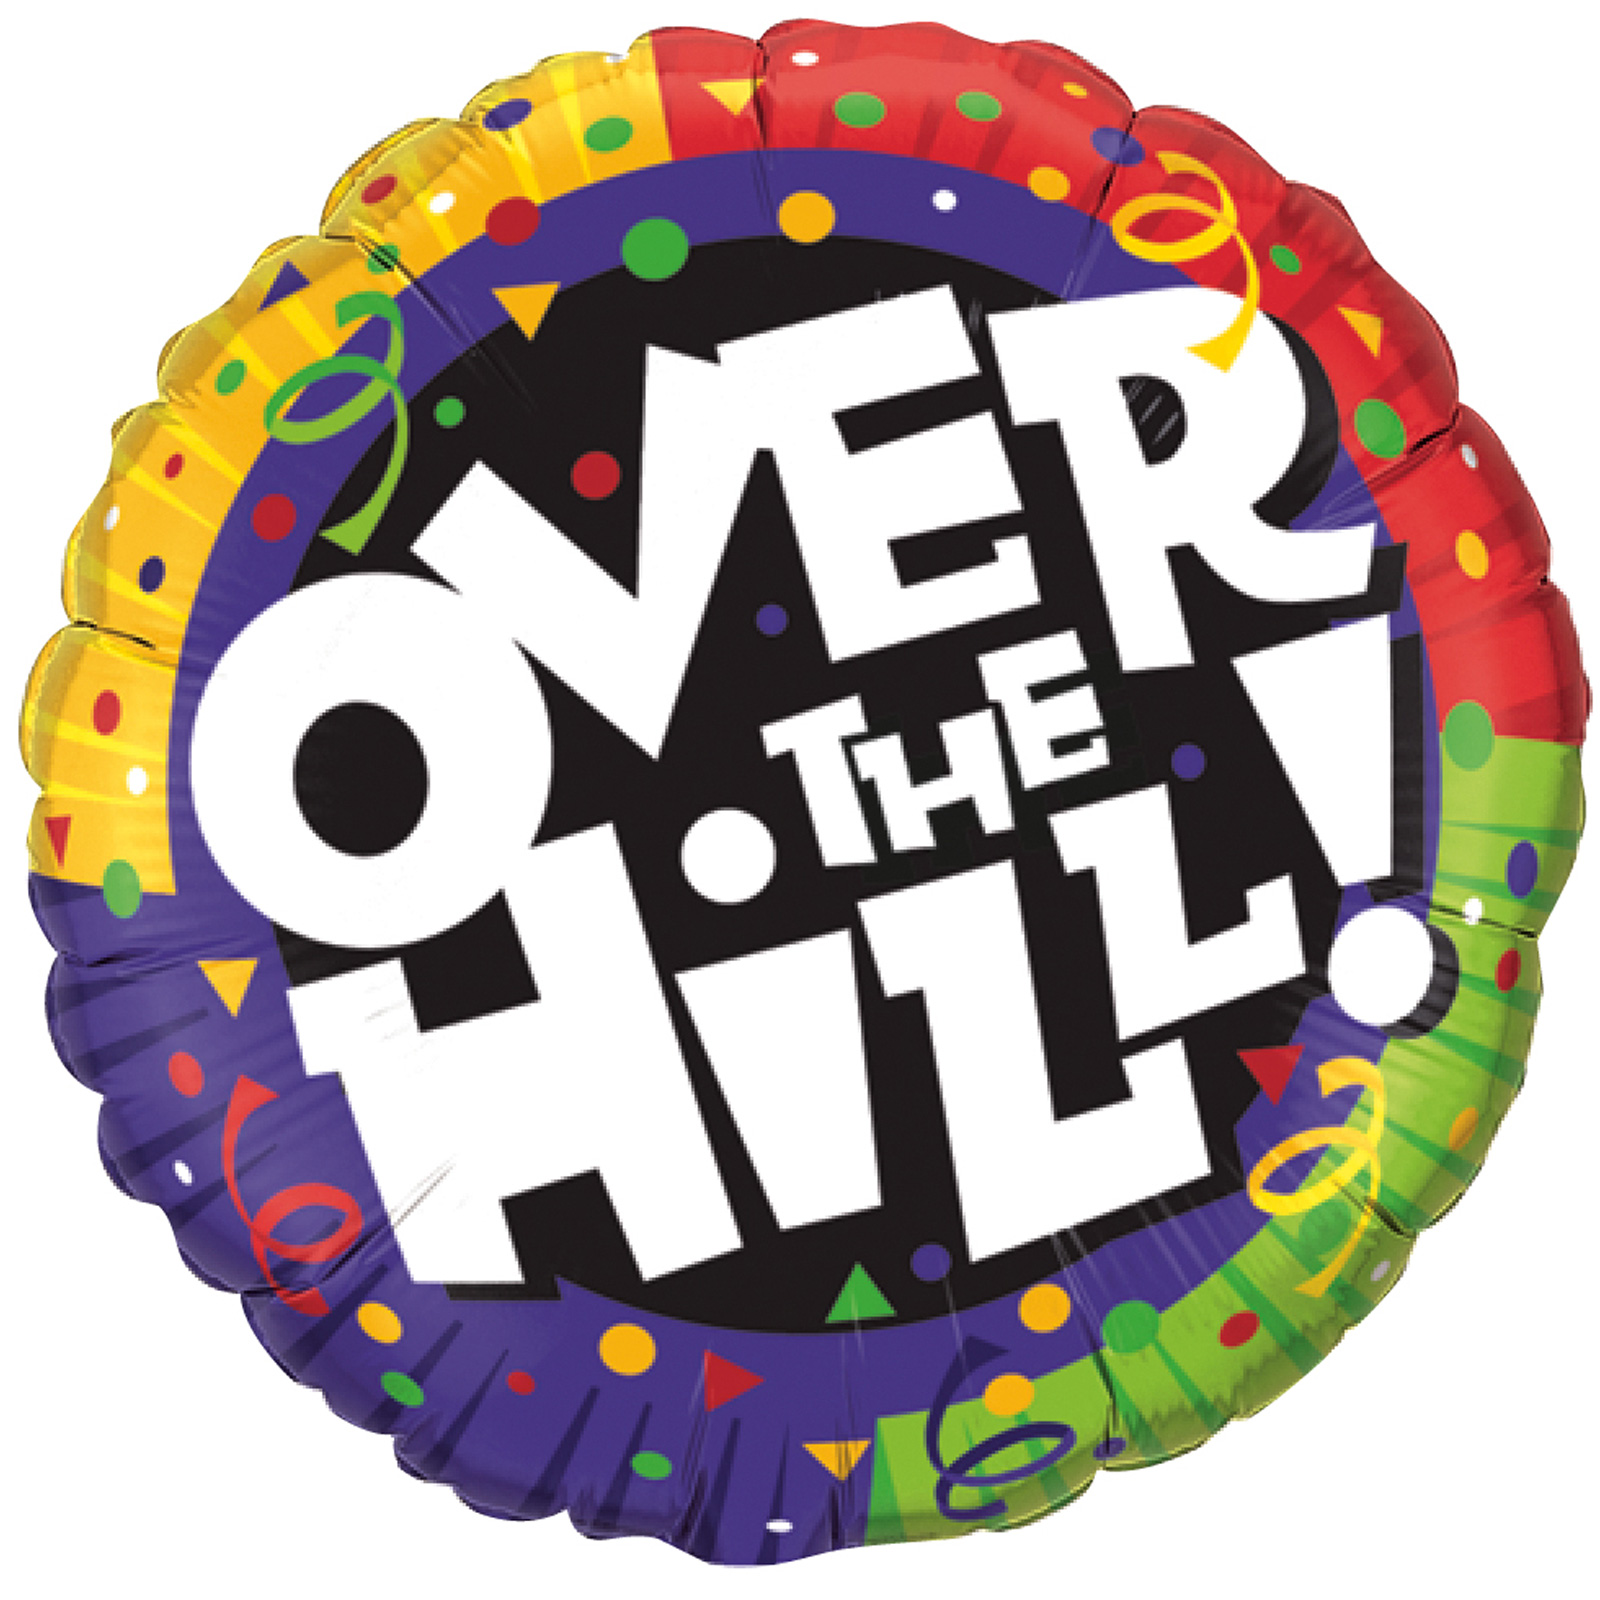 40th birthday over the hill clipart - ClipartFest